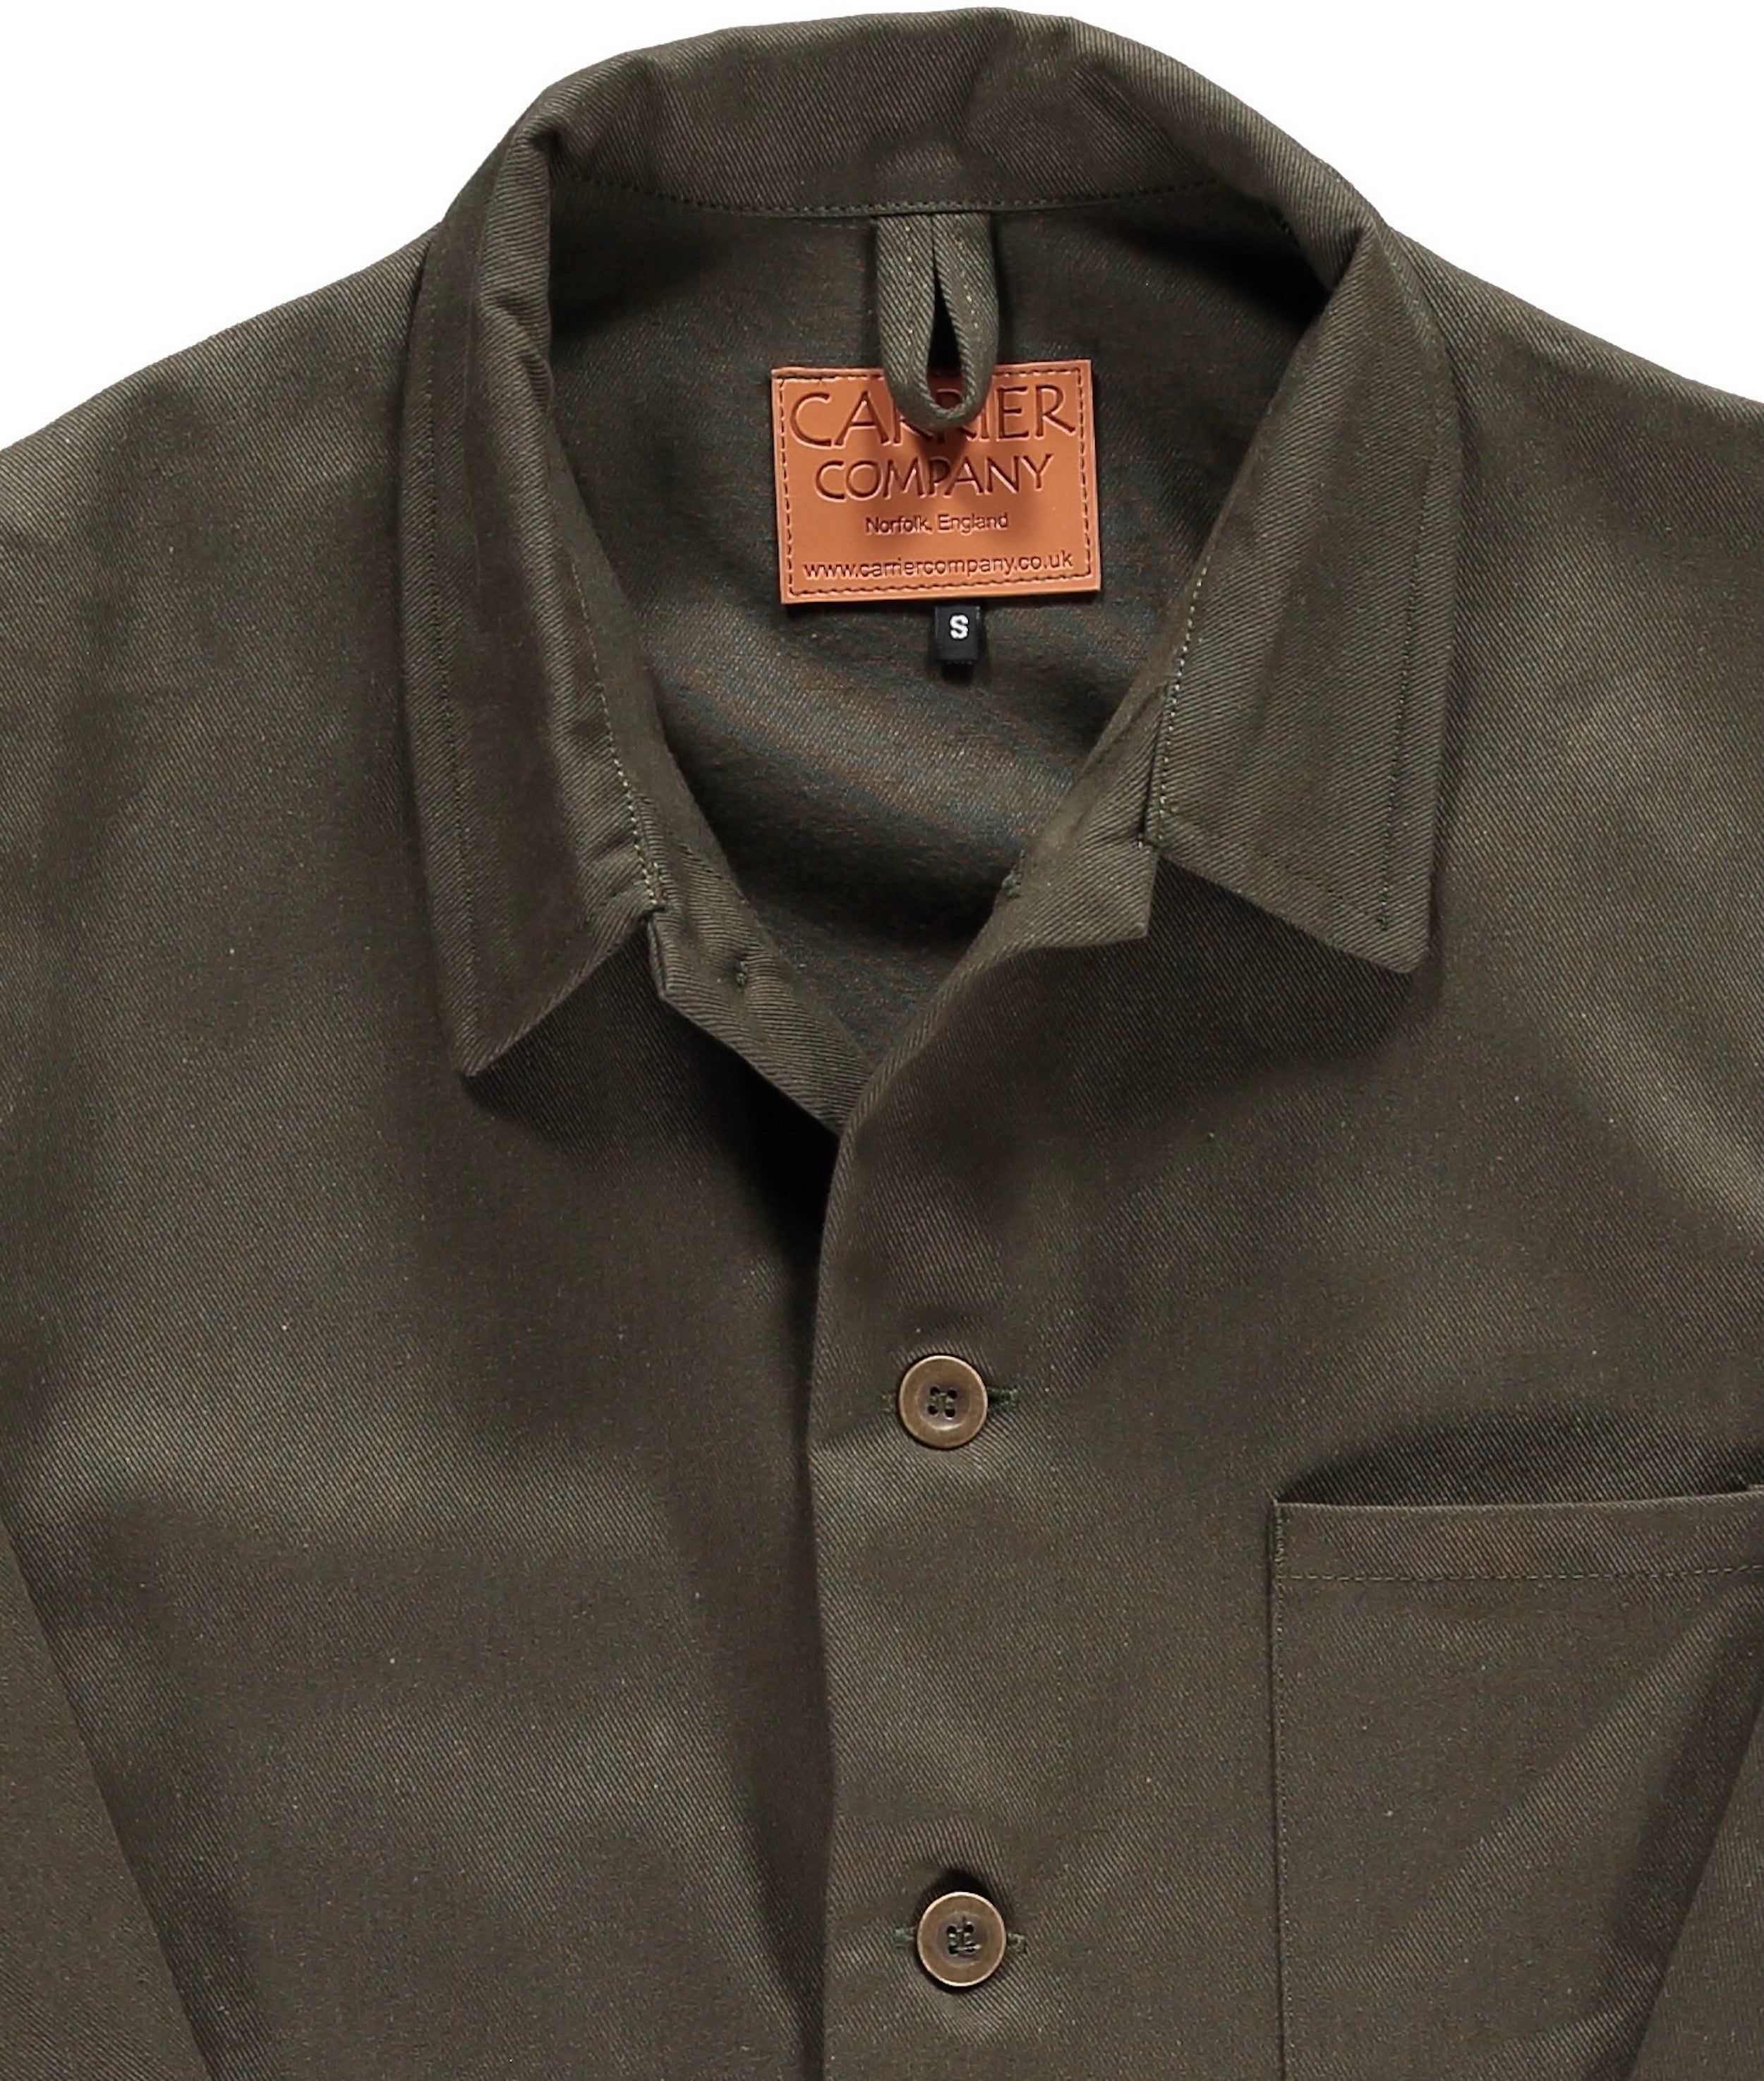 Carrier Company Work Jacket in Olive